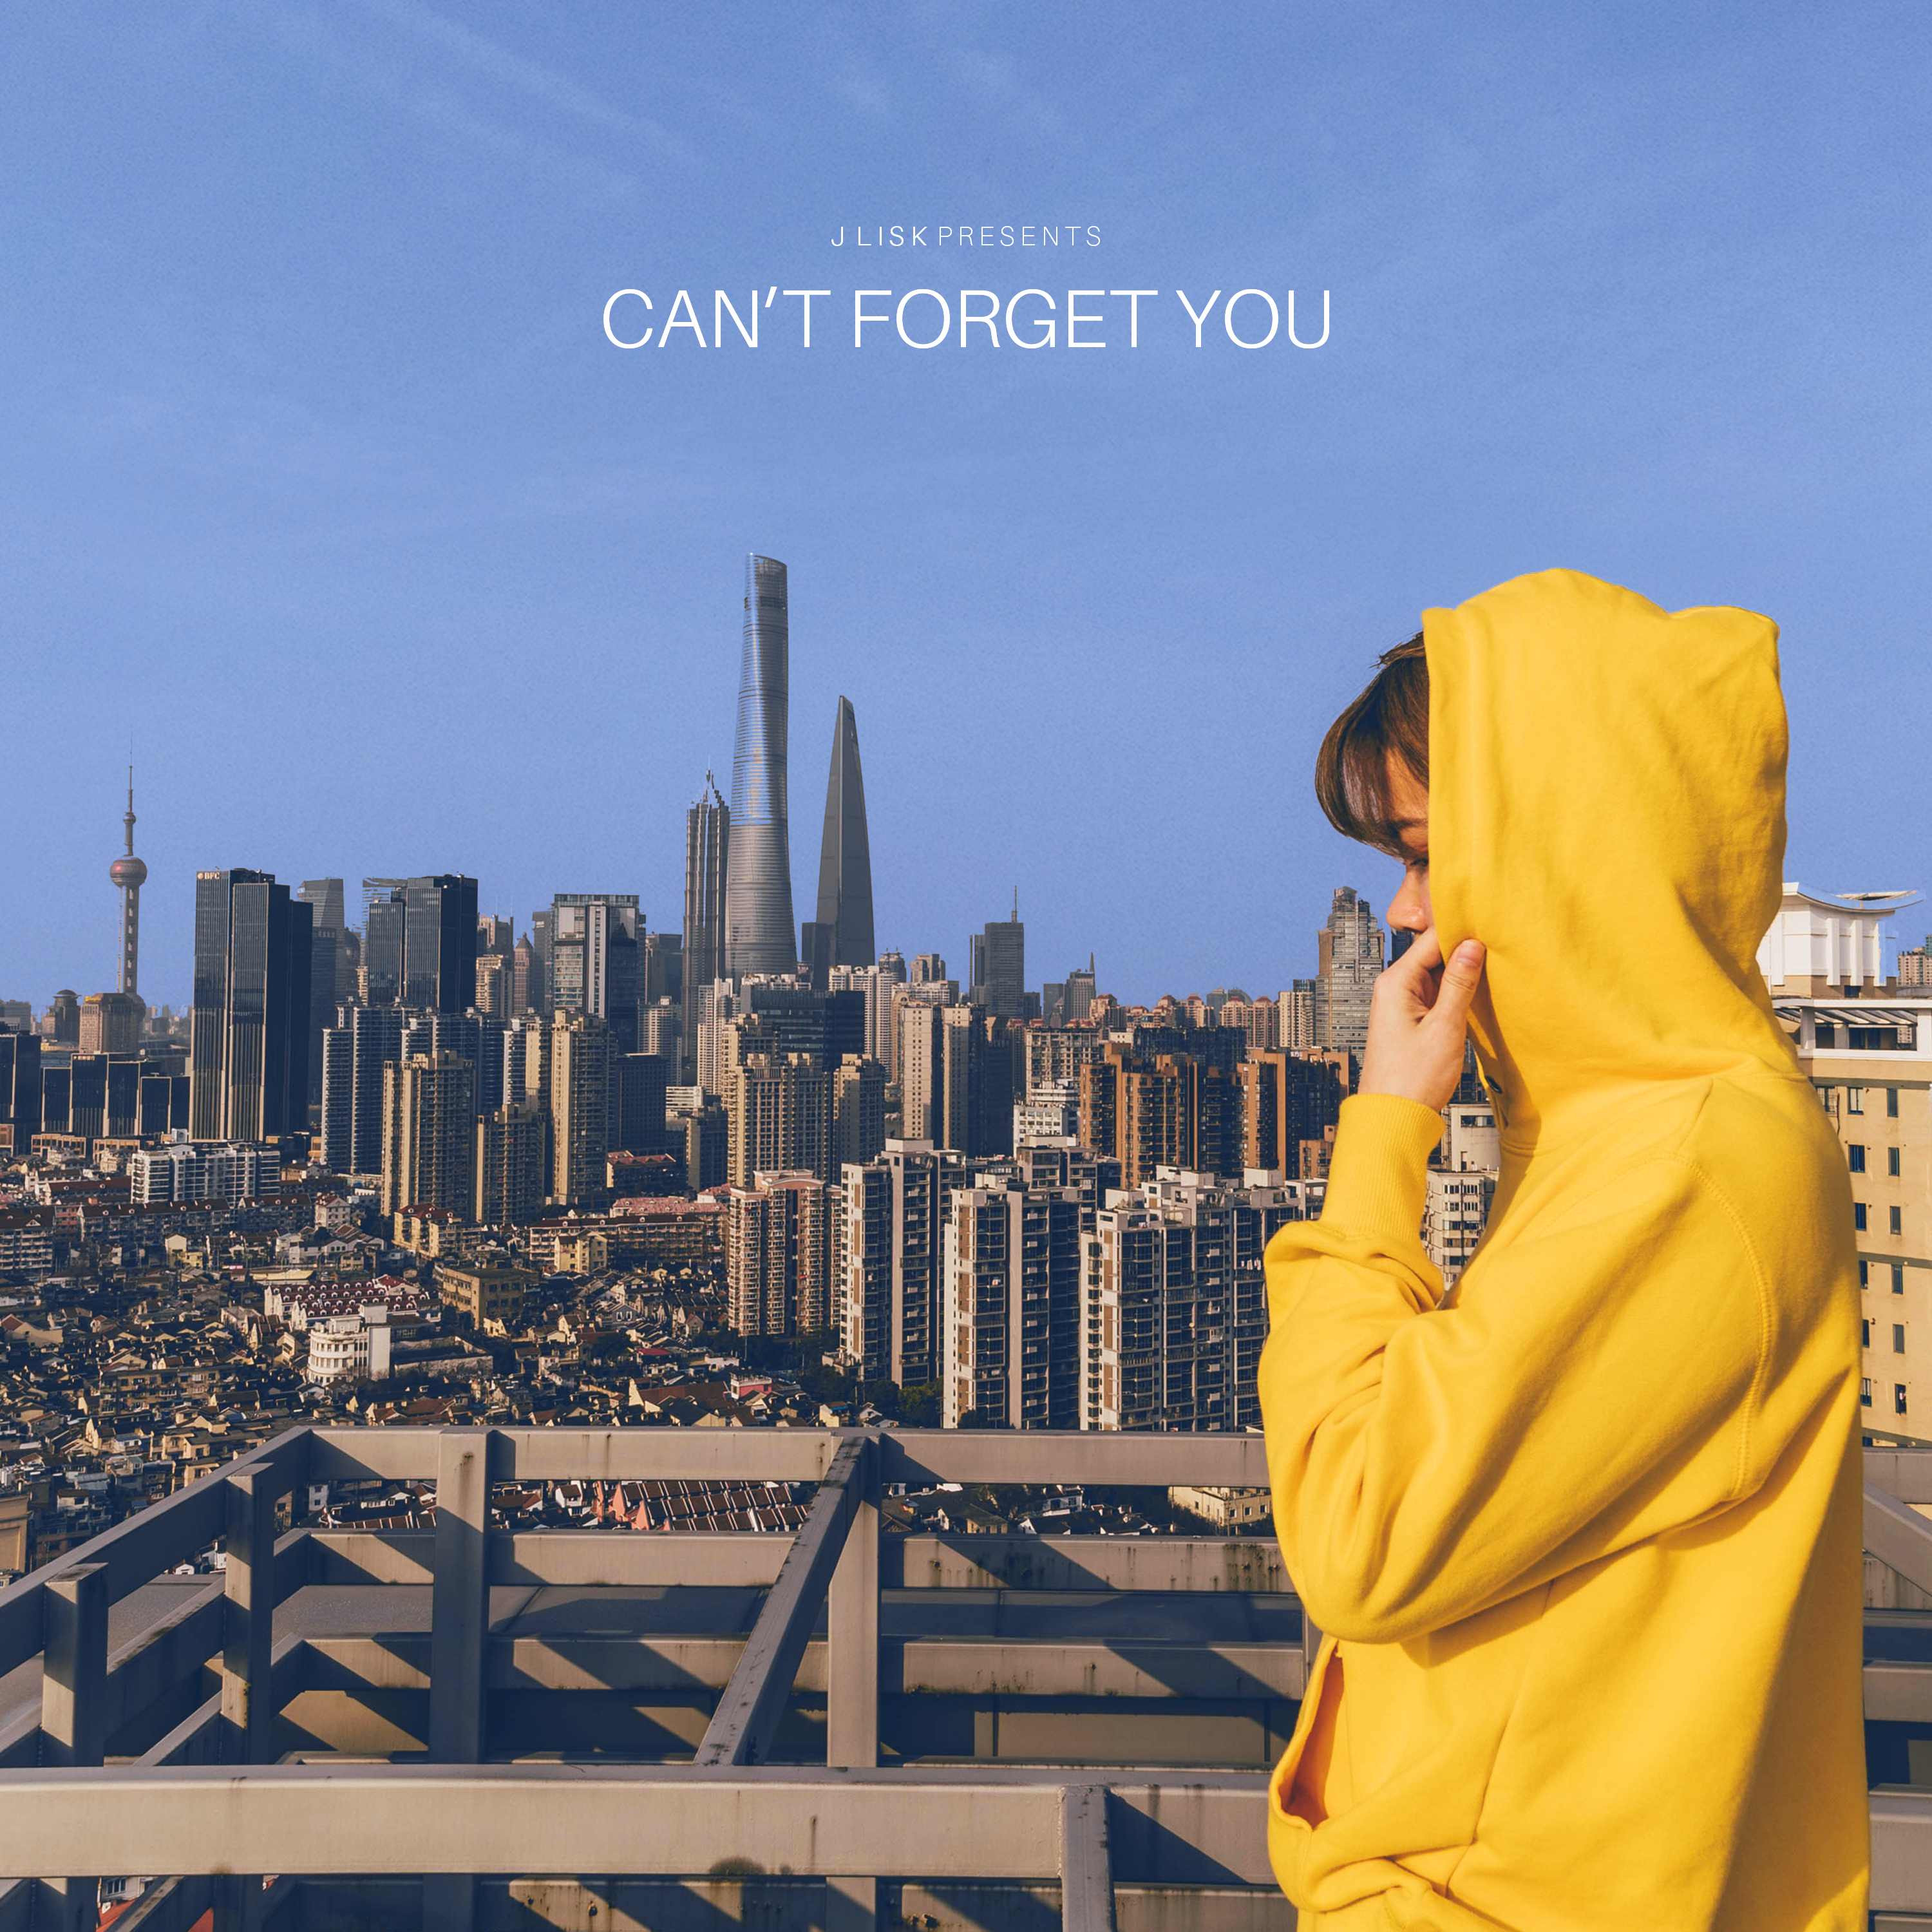 J. Lisk - Can't Forget You